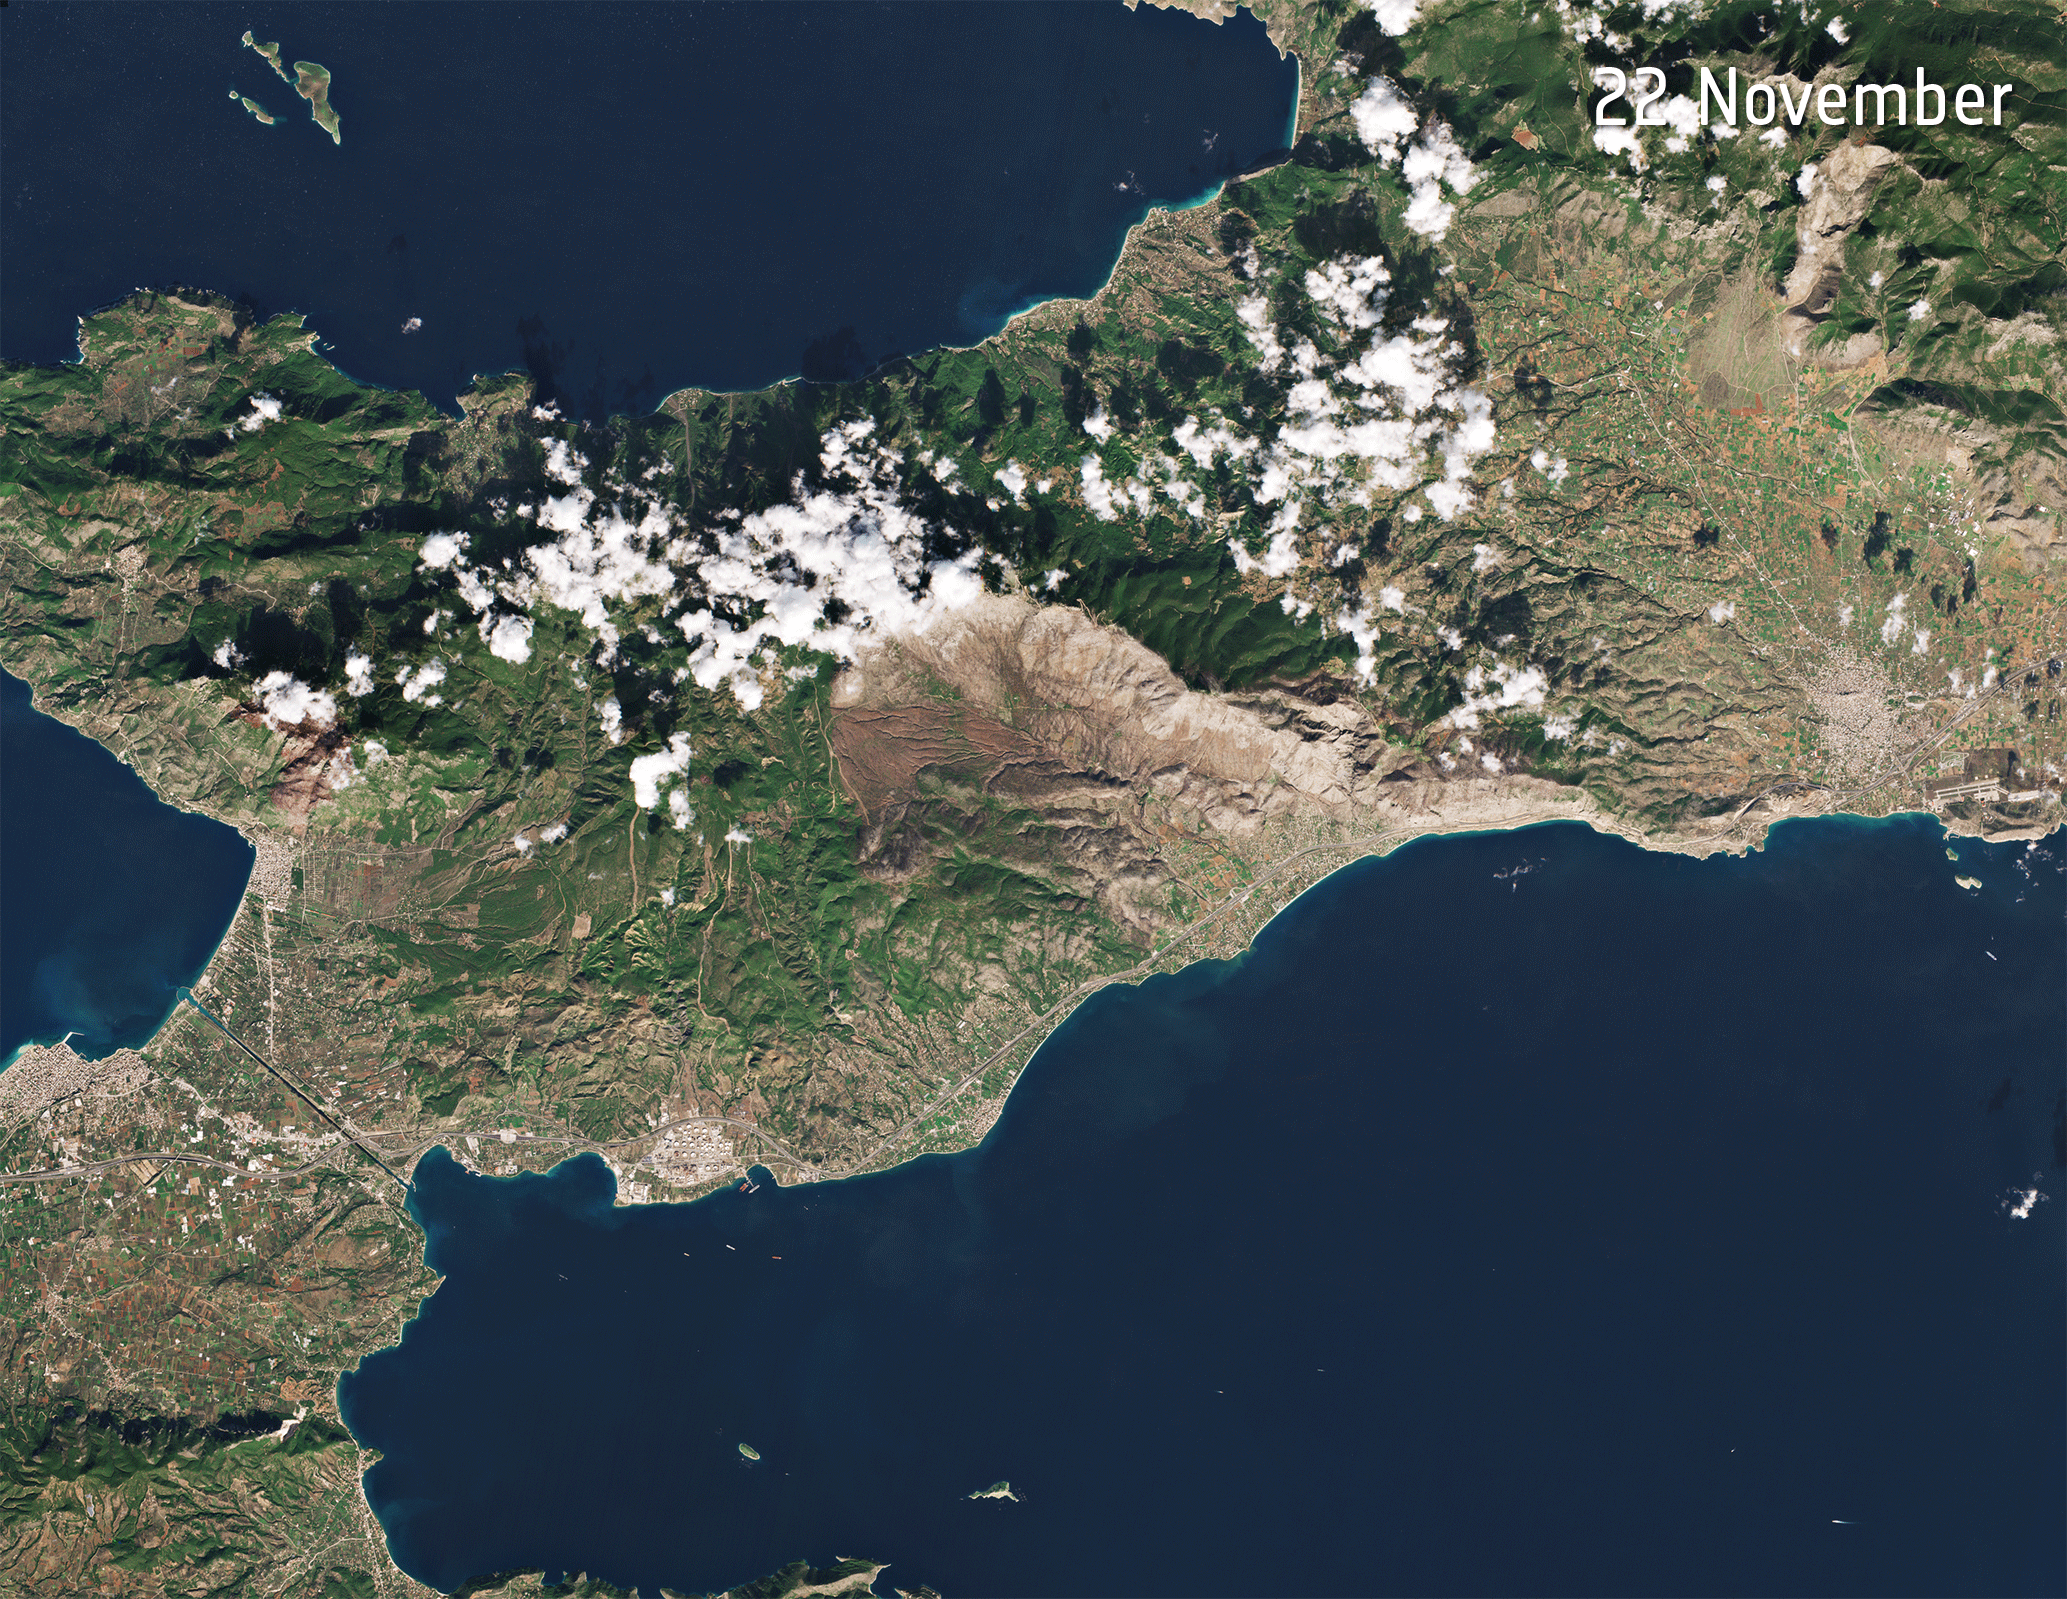 Figure 4: Using images from the Copernicus Sentinel-2 mission, the animation shows the before-and-after of the recent floods from the 24 November. Sediment and mud, caused by the heavy rains, can be seen gushing into the Megara Gulf – stretching 14 km from the coast. Debris, most likely vegetation and rubbish, is visible in brown floating in the waters (image credit: ESA, the image contains modified Copernicus Sentinel data (2019), processed by ESA, CC BY-SA 3.0 IGO)